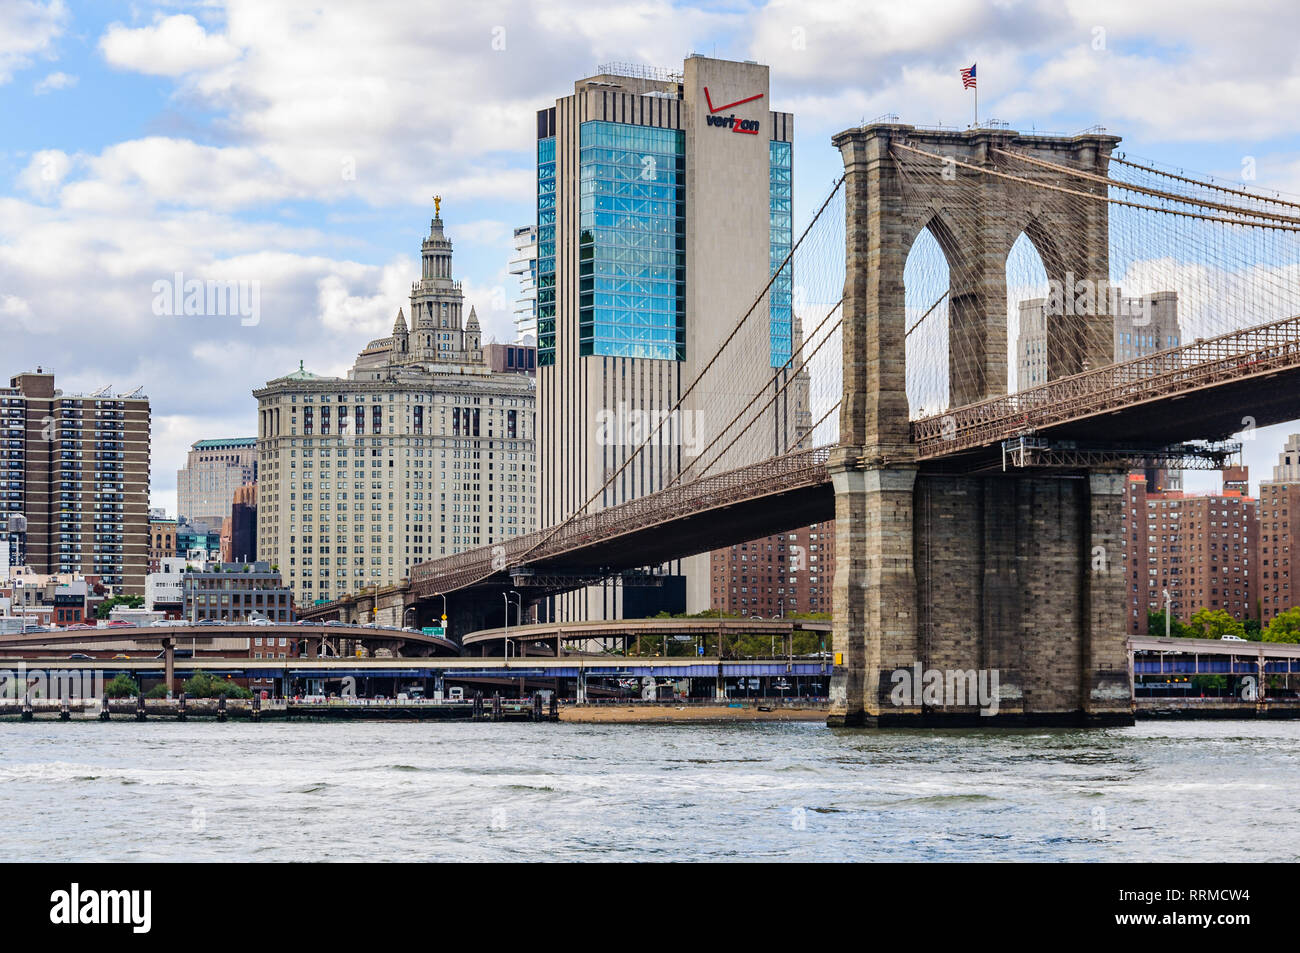 The Brooklyn Bridge and skyscrapers from the Brooklyn Bridge Park in the district of Brooklyn, New York, USA Stock Photo